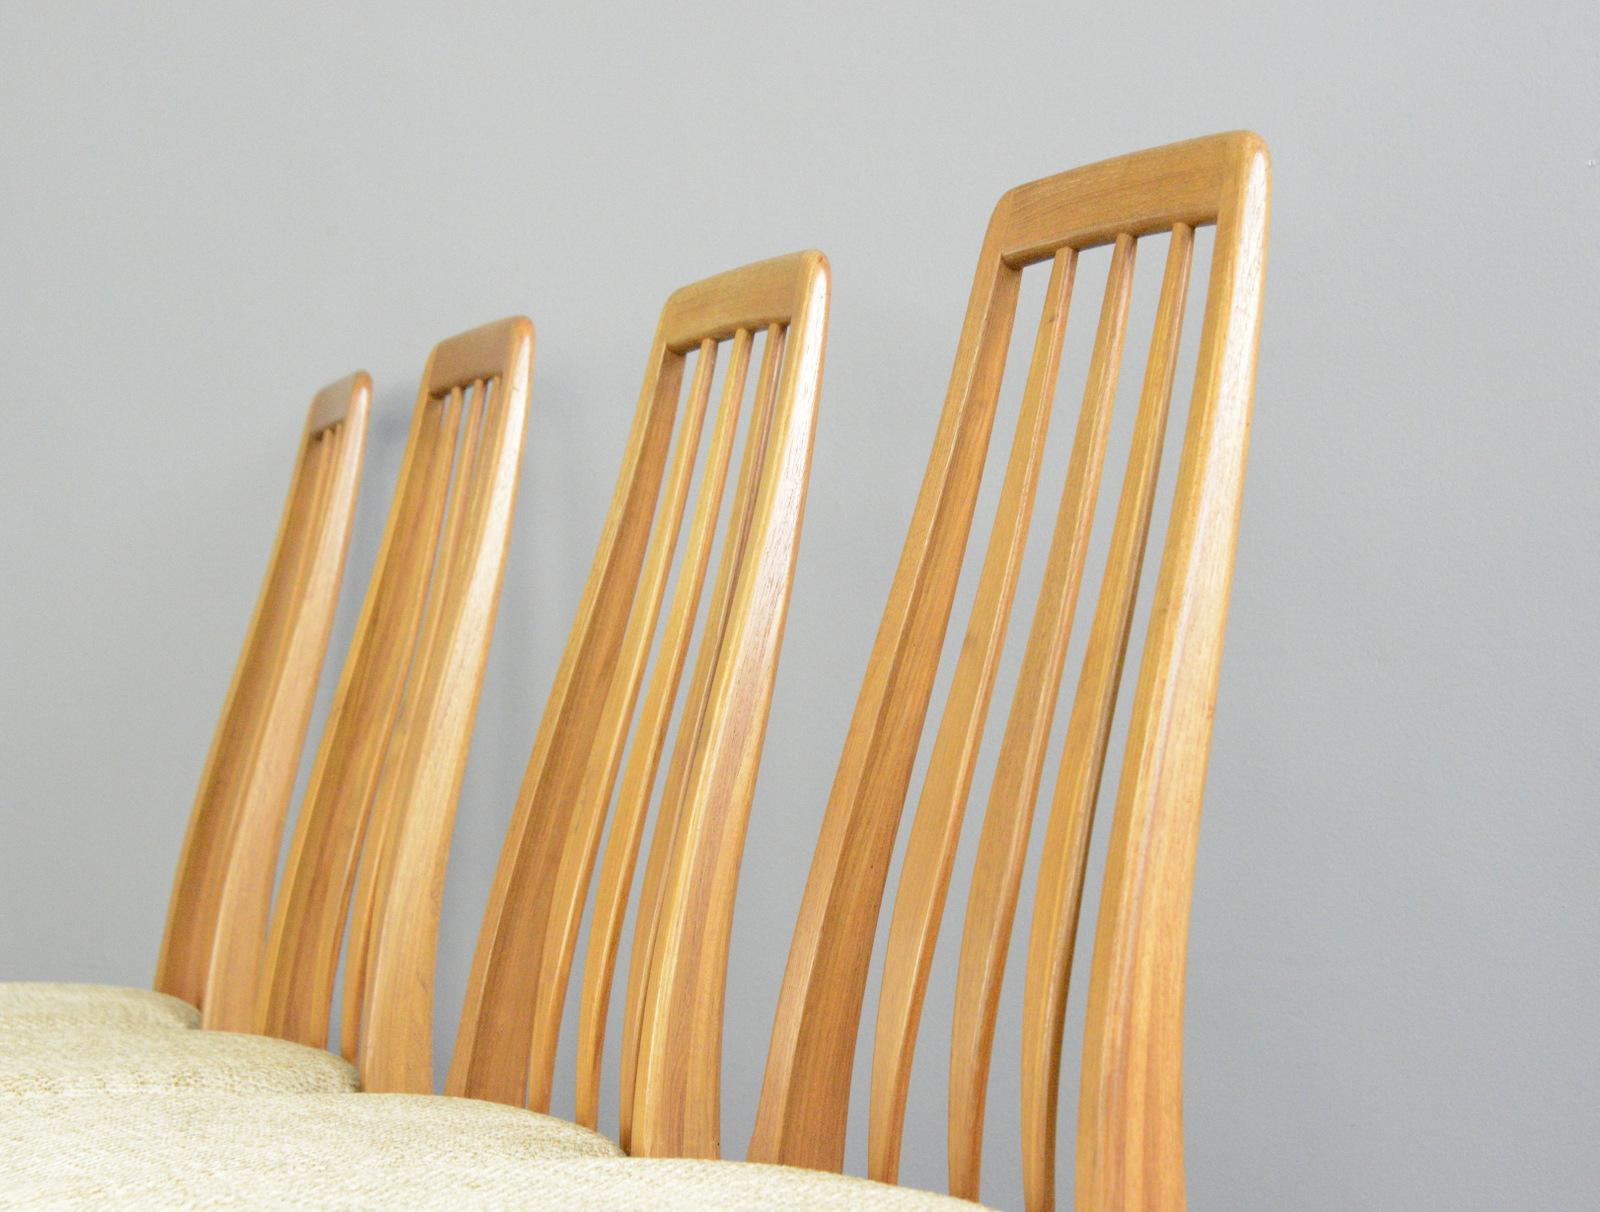 Set of 4 Eva dining chairs by Niels Koefoed for Koefoeds Hornslet 1960s

- Price is for the set of 4
- Solid Teak frames
- Original upholstery
- By Niels Koefoed
- Danish ~ 1960s
- 47cm wide x 41cm deep x 96cm tall
- 47cm seat